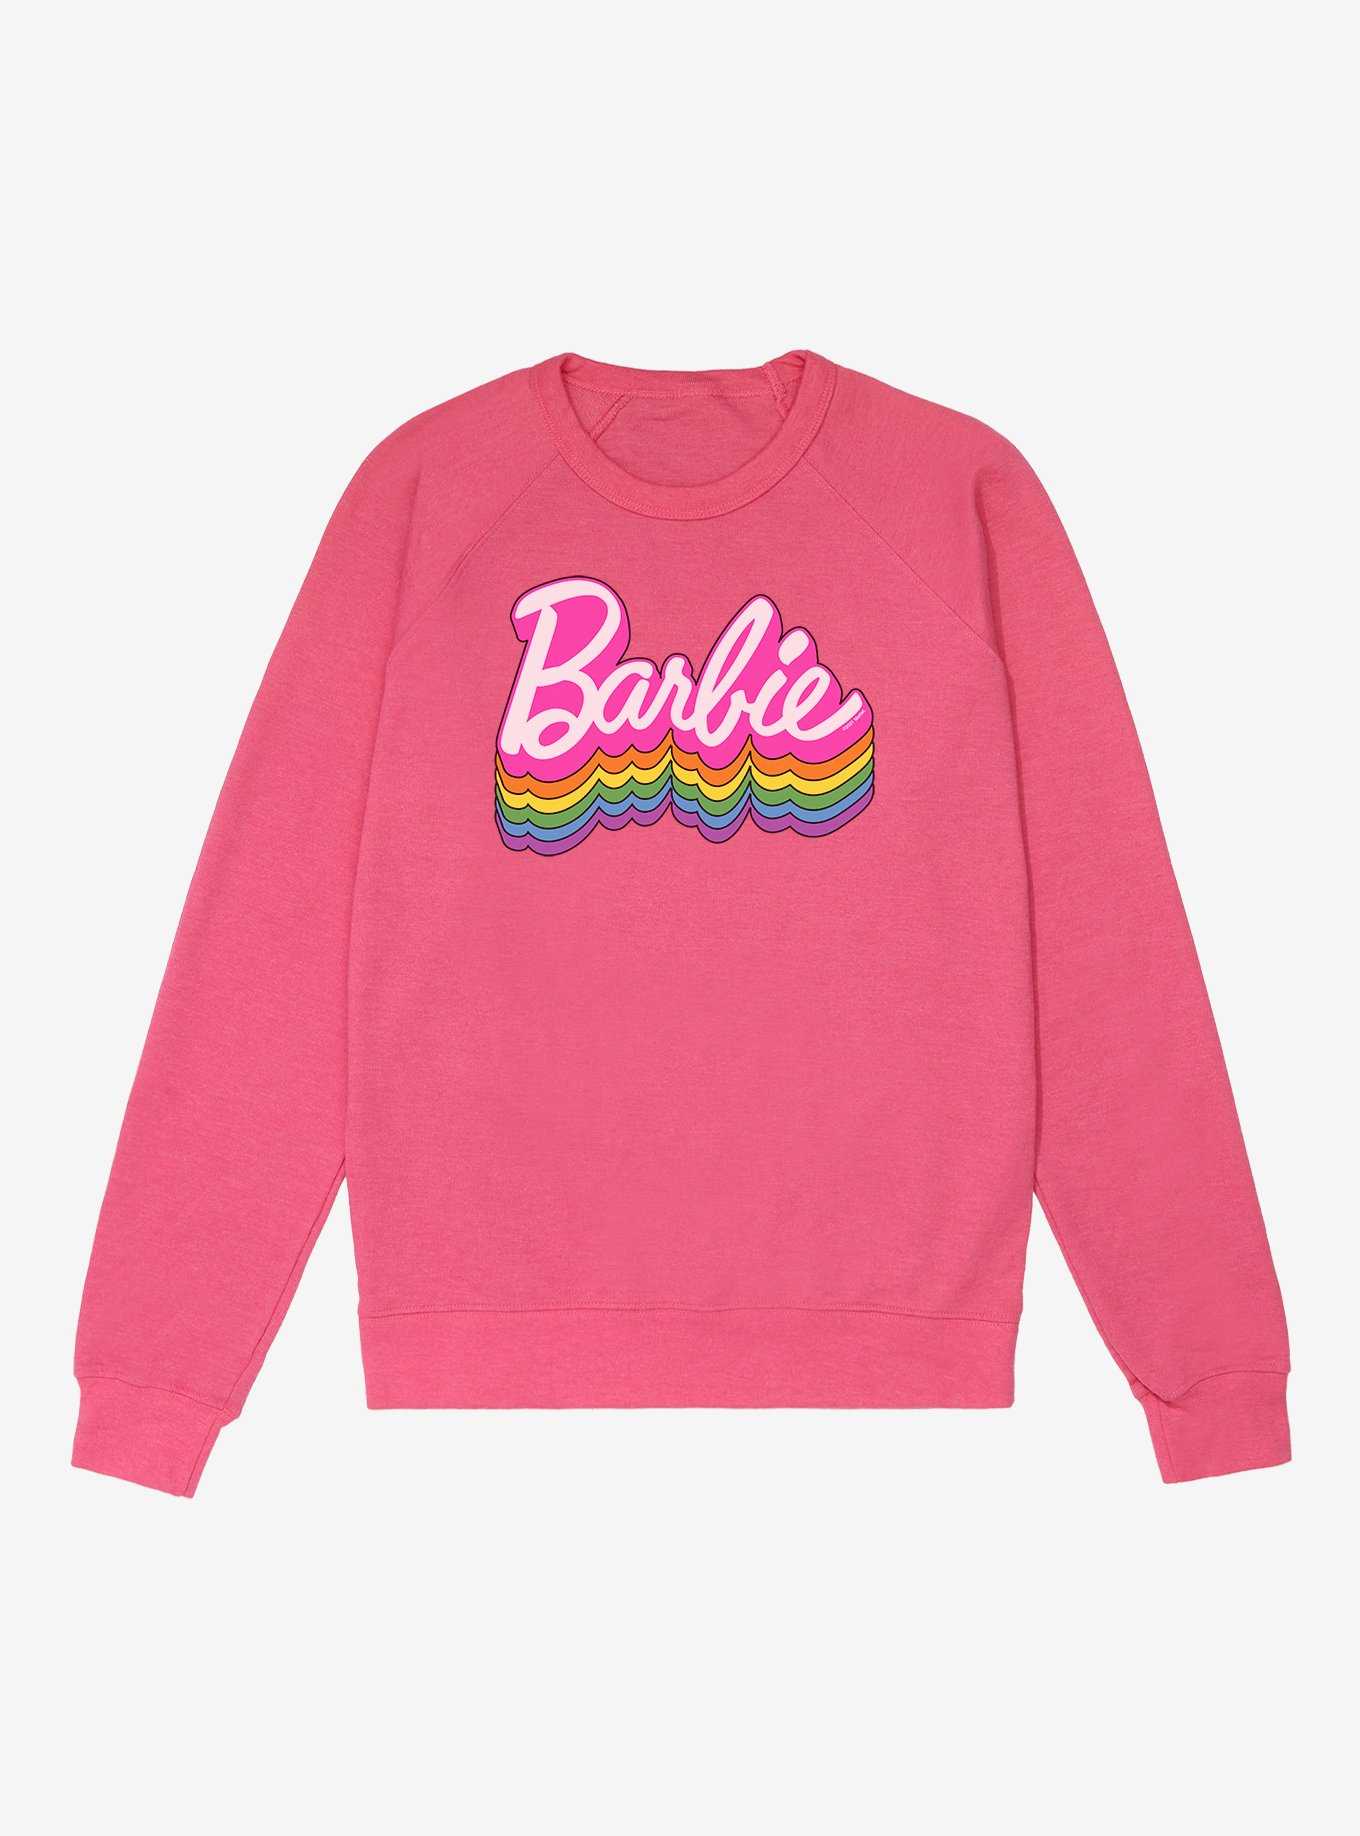 Barbie Ranbow Logo Stack French Terry Sweatshirt, , hi-res